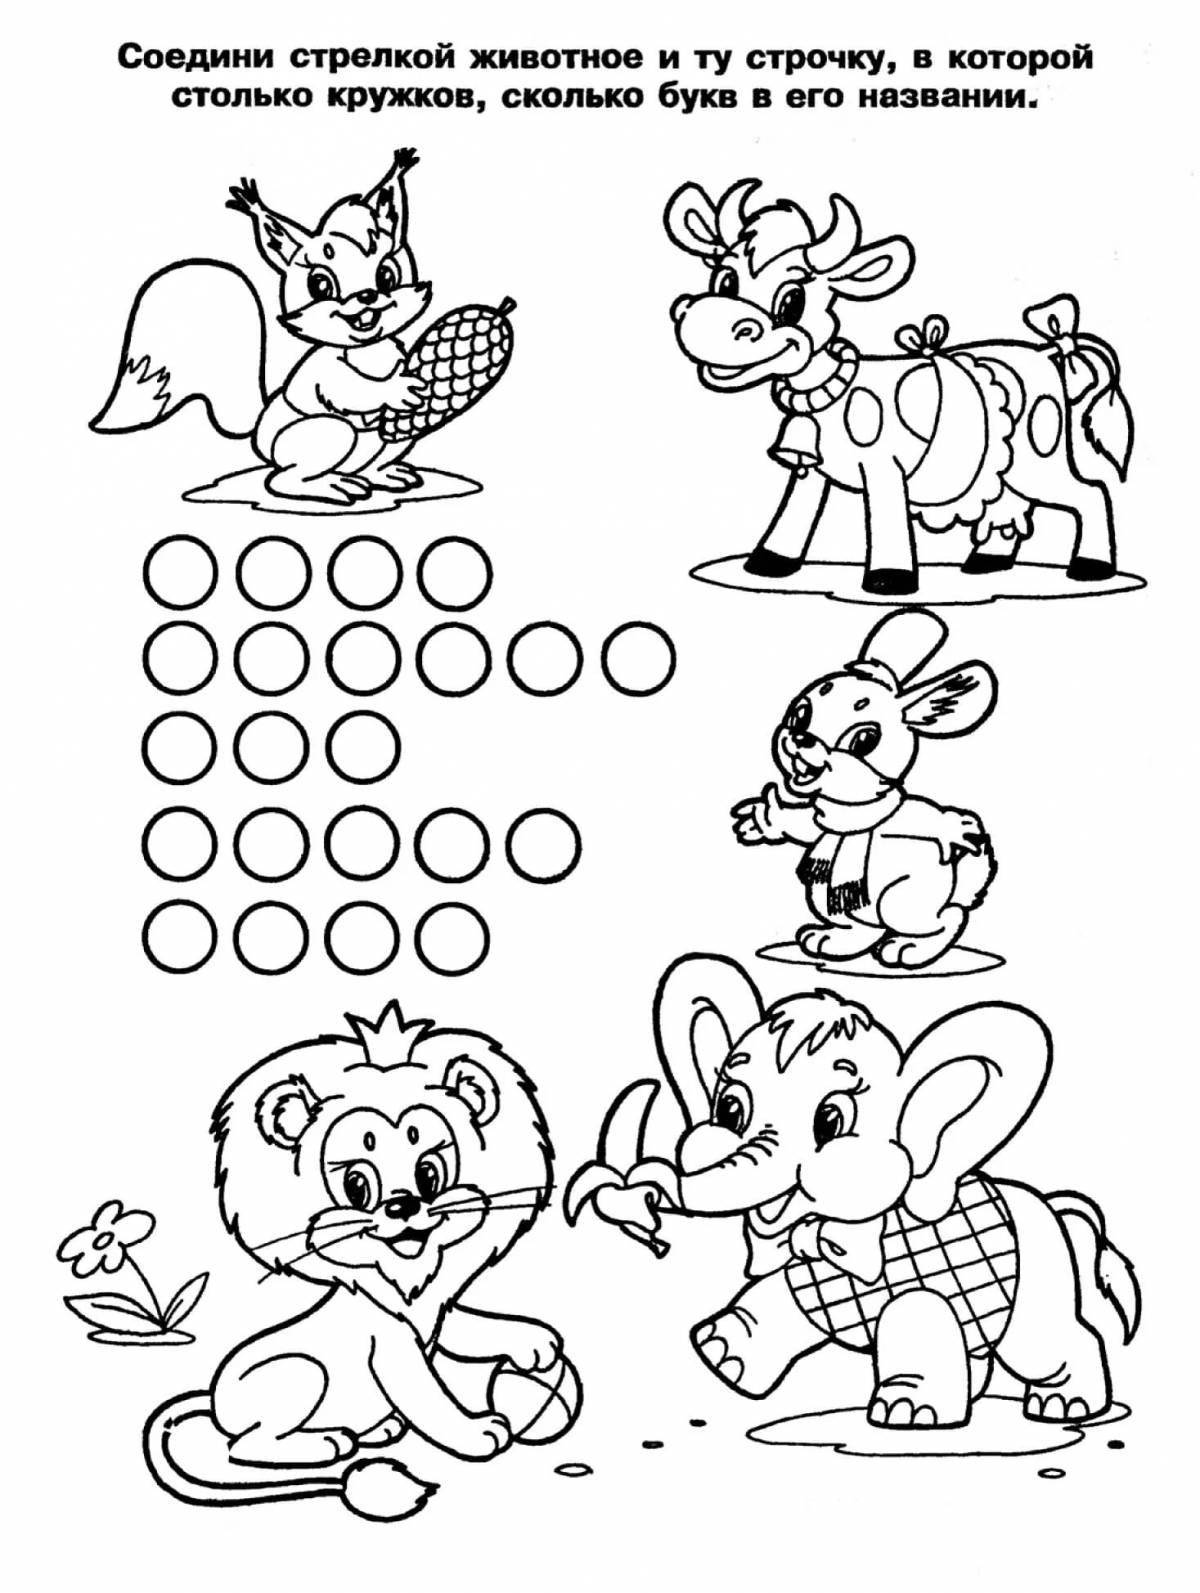 Stimulating coloring page 6 years educational